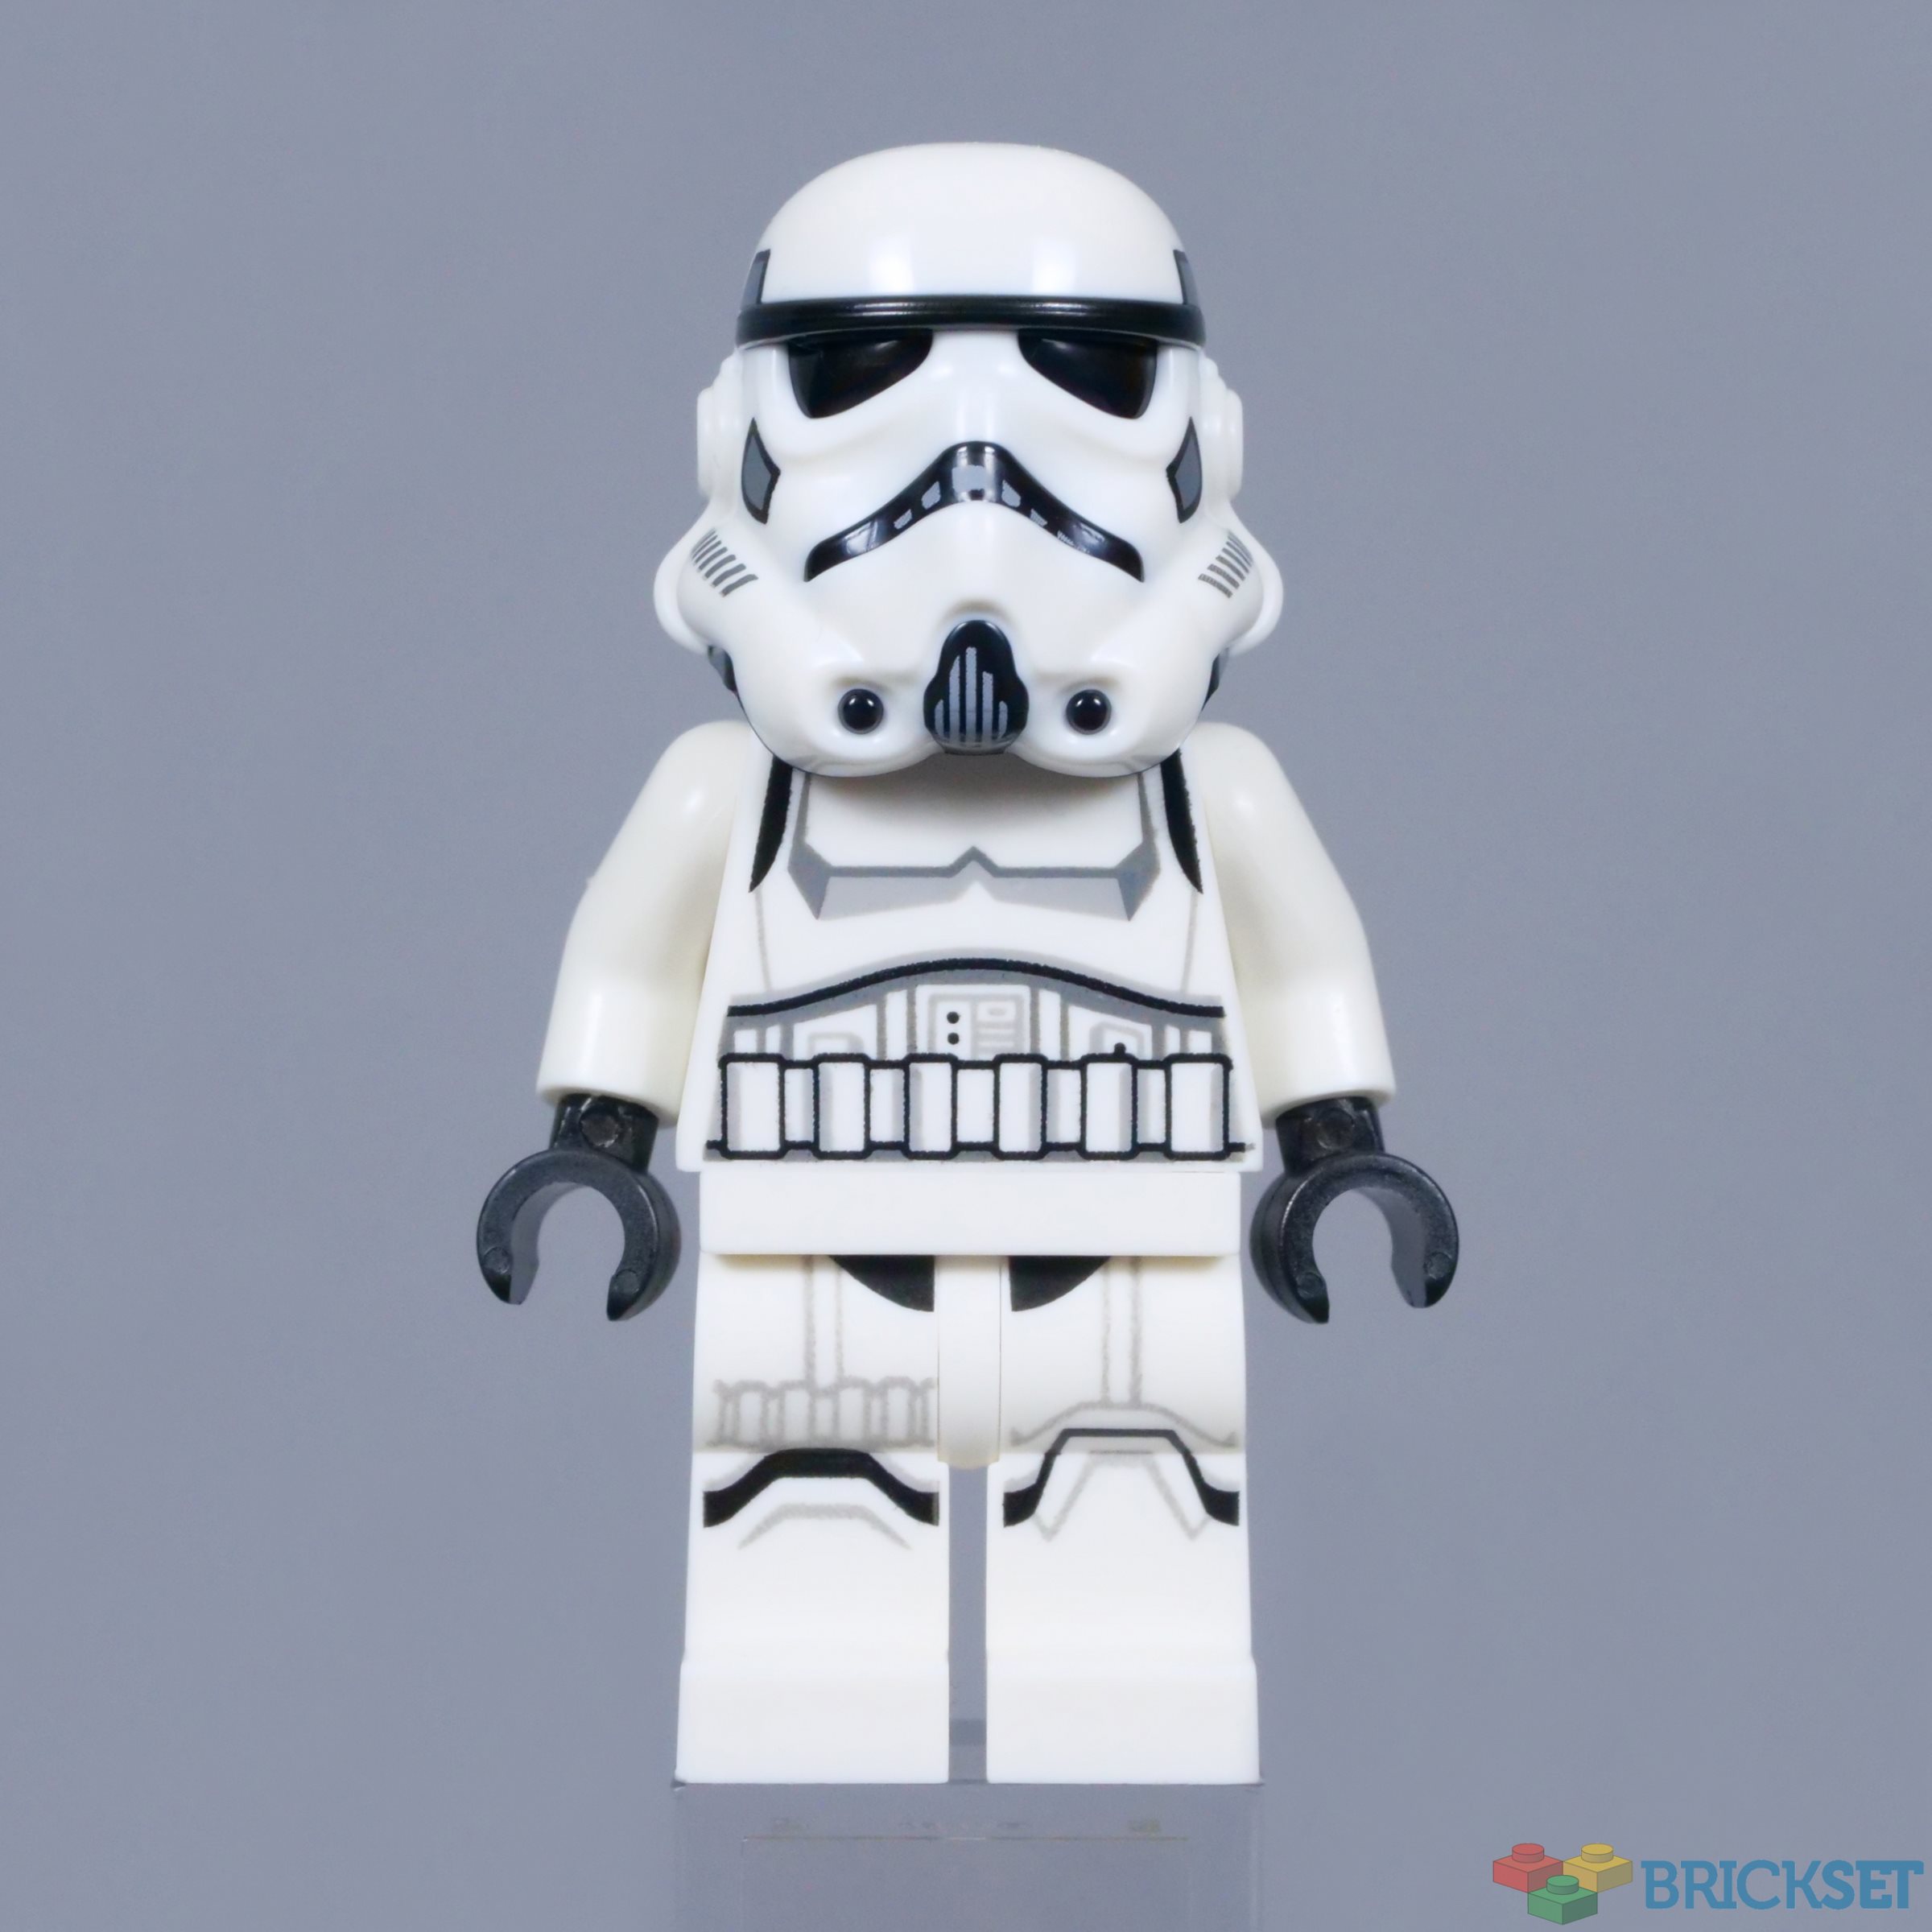 Is this what LEGO Stormtroopers will look like in 2023?